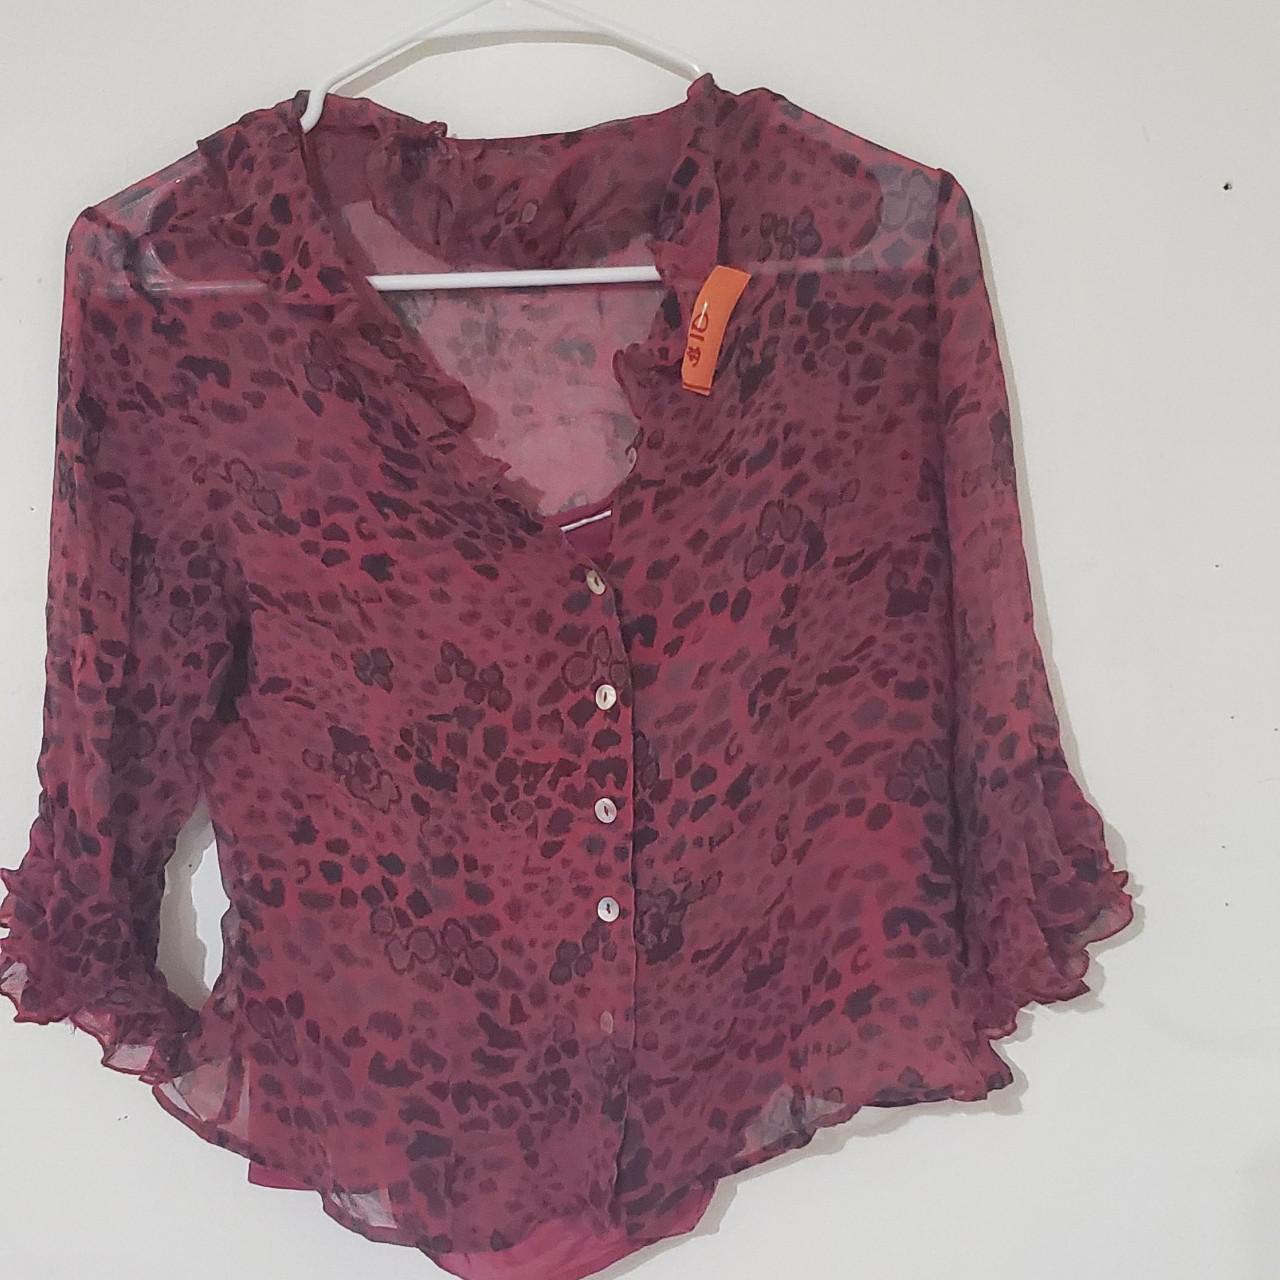 Product Image 1 - Top blouse lace 
Spaghetti top
#blouse
#top
#upcycle
#Y2k